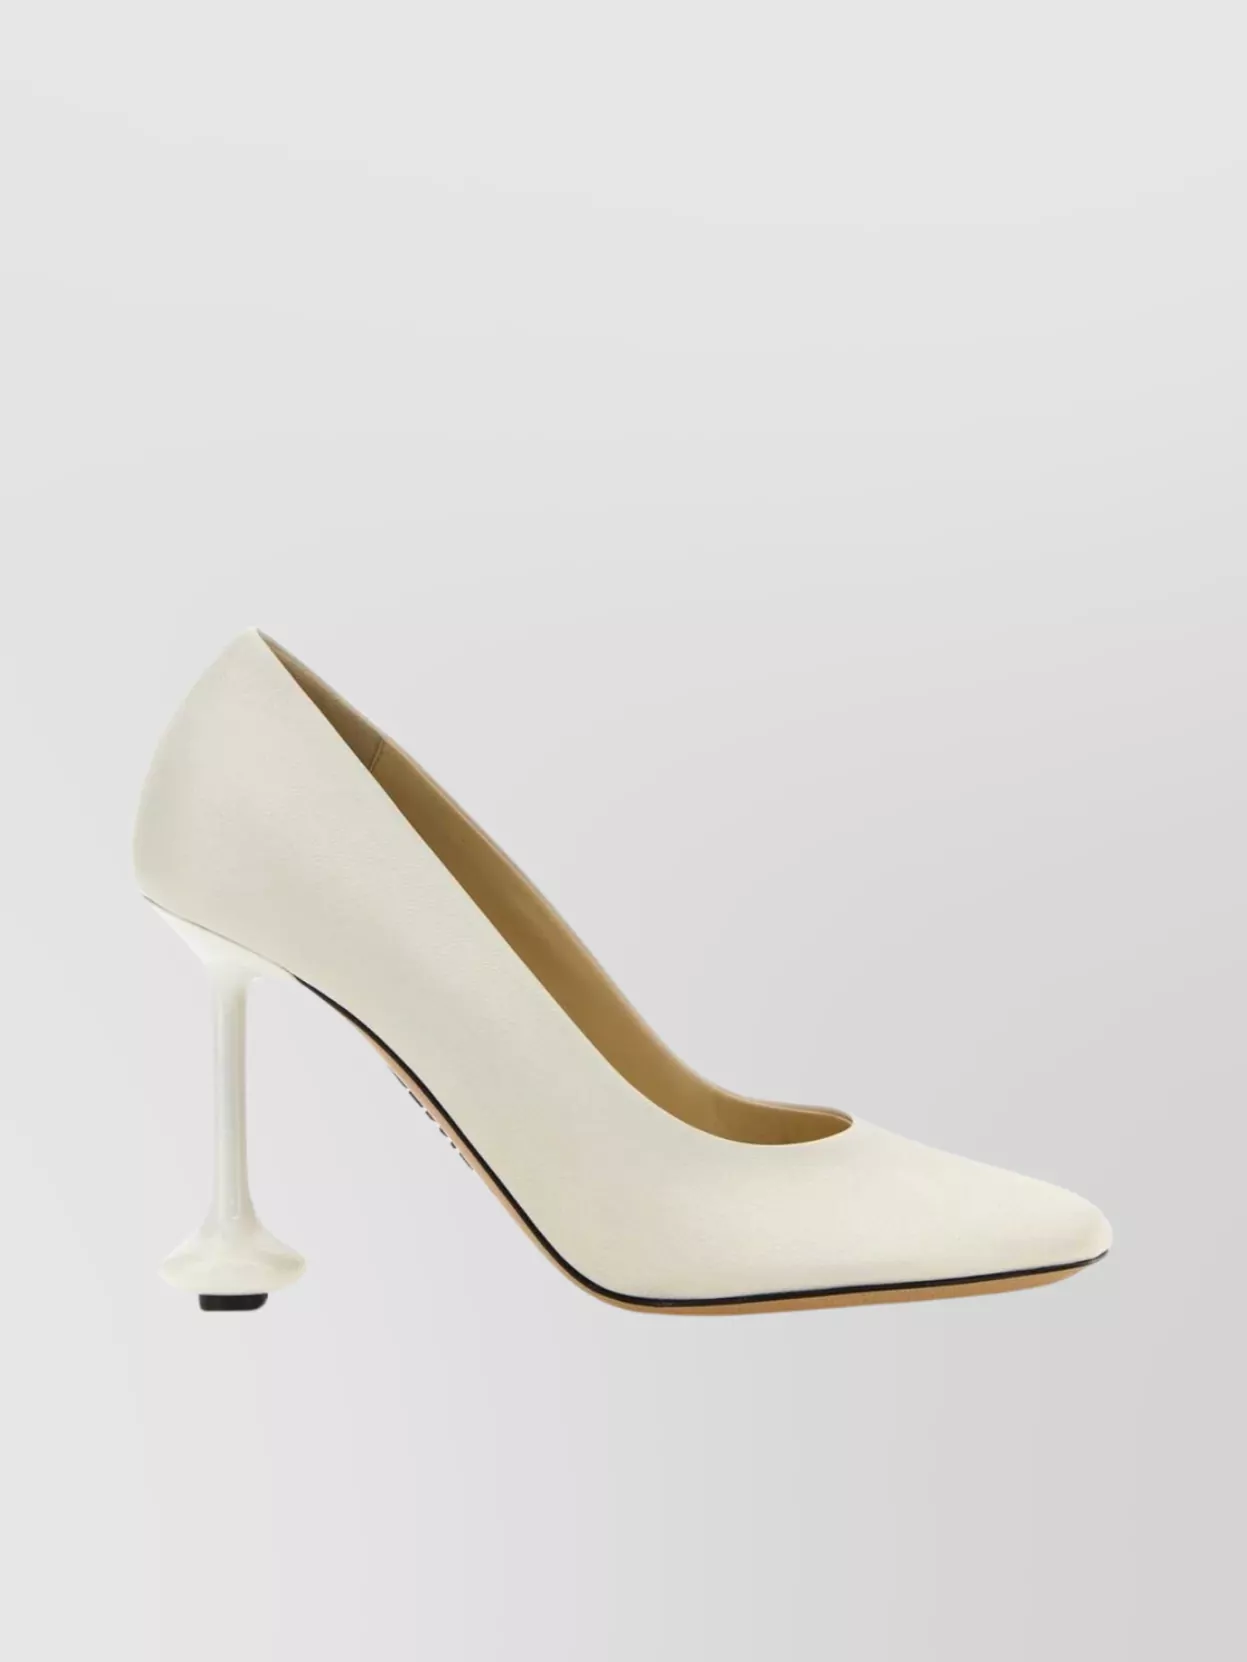 Loewe Leather Pointed Toe Stiletto Pumps